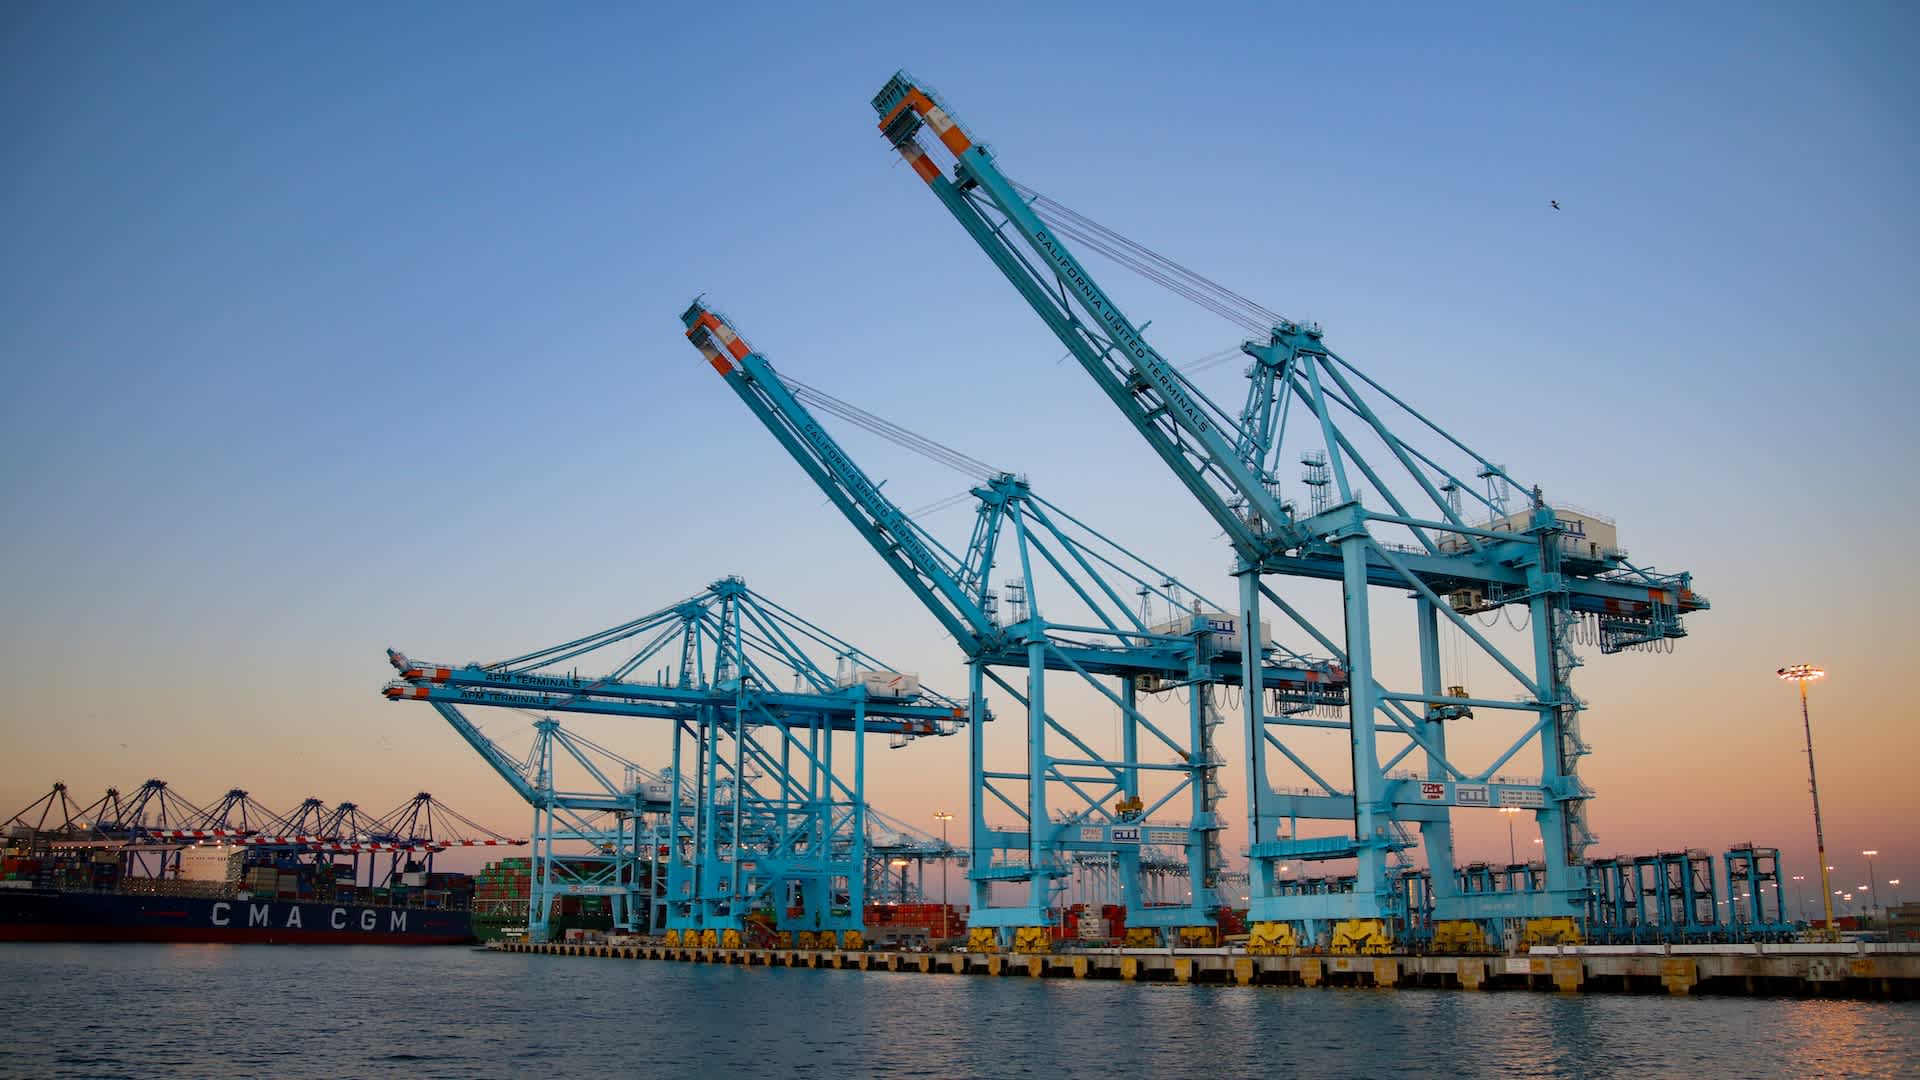 Port of LA: How to reduce emissions in the US’s most polluted area